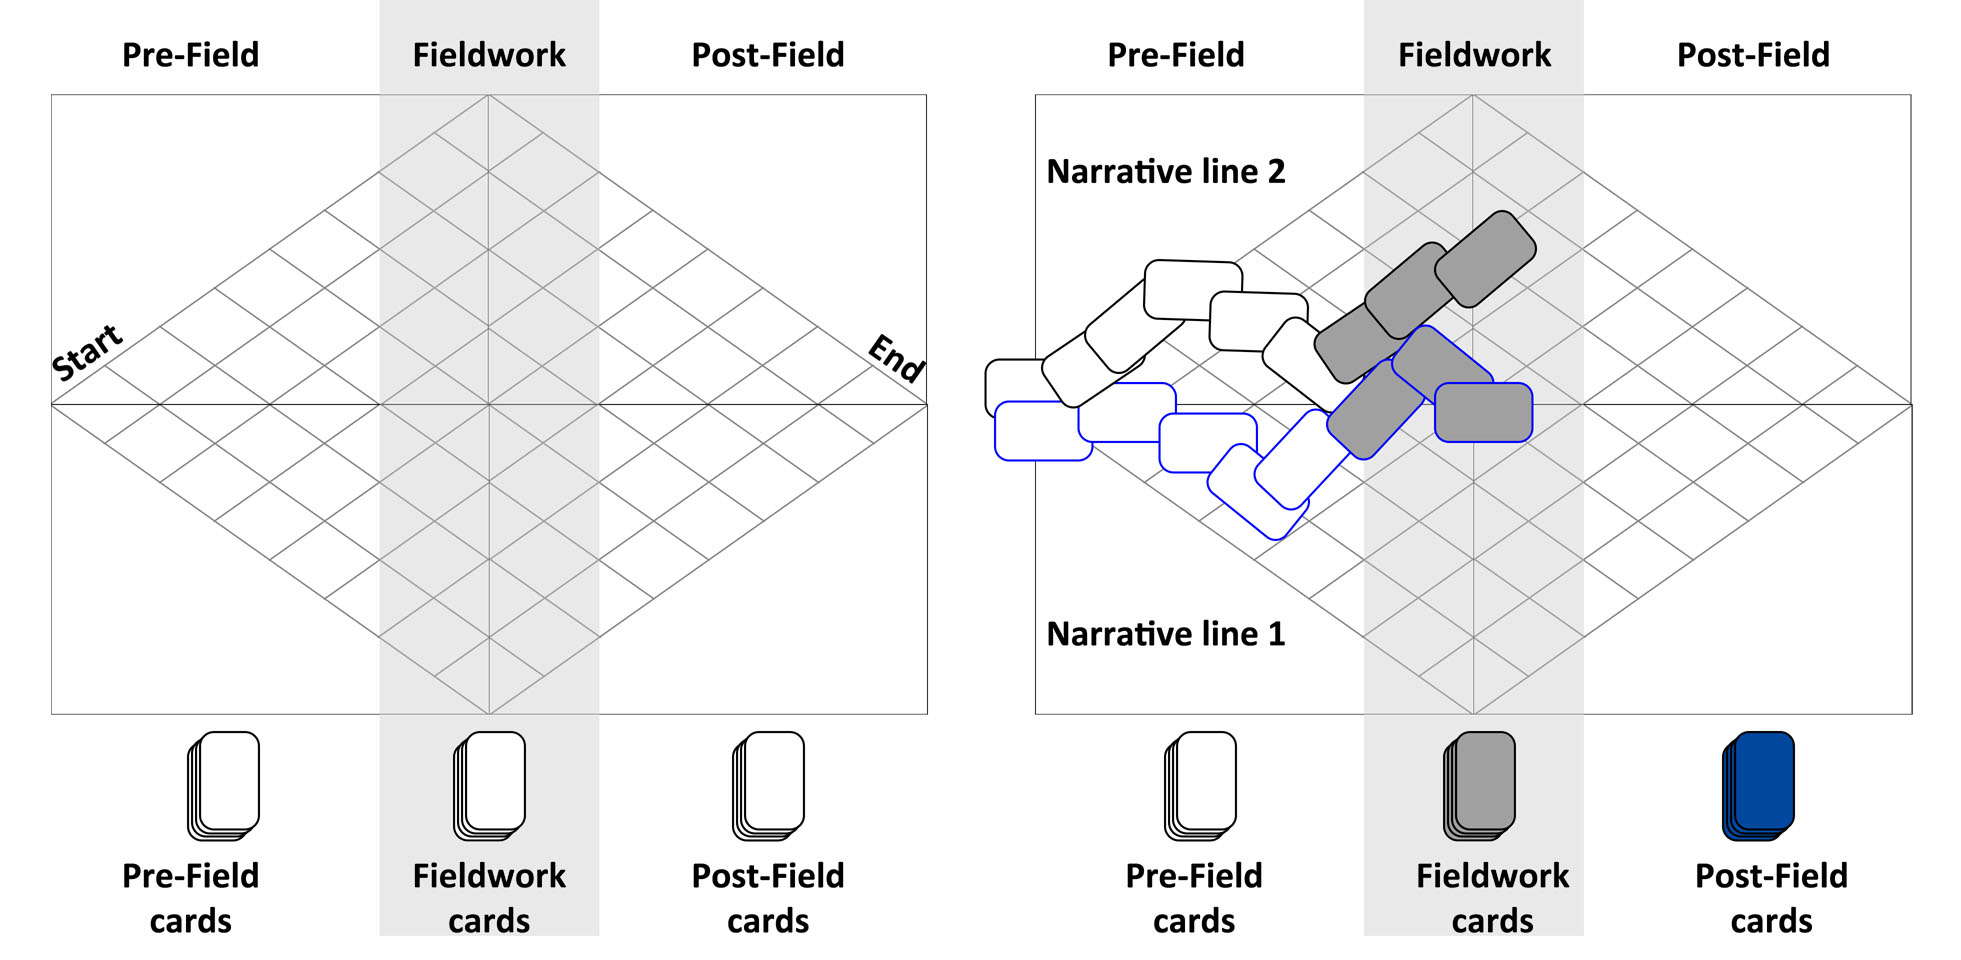 The image of two game fields: the one on the left is without cards, the one one the right is with cards. Each field has three areas and the corresponding cards: pre-field, fieldwork, and post-field. 